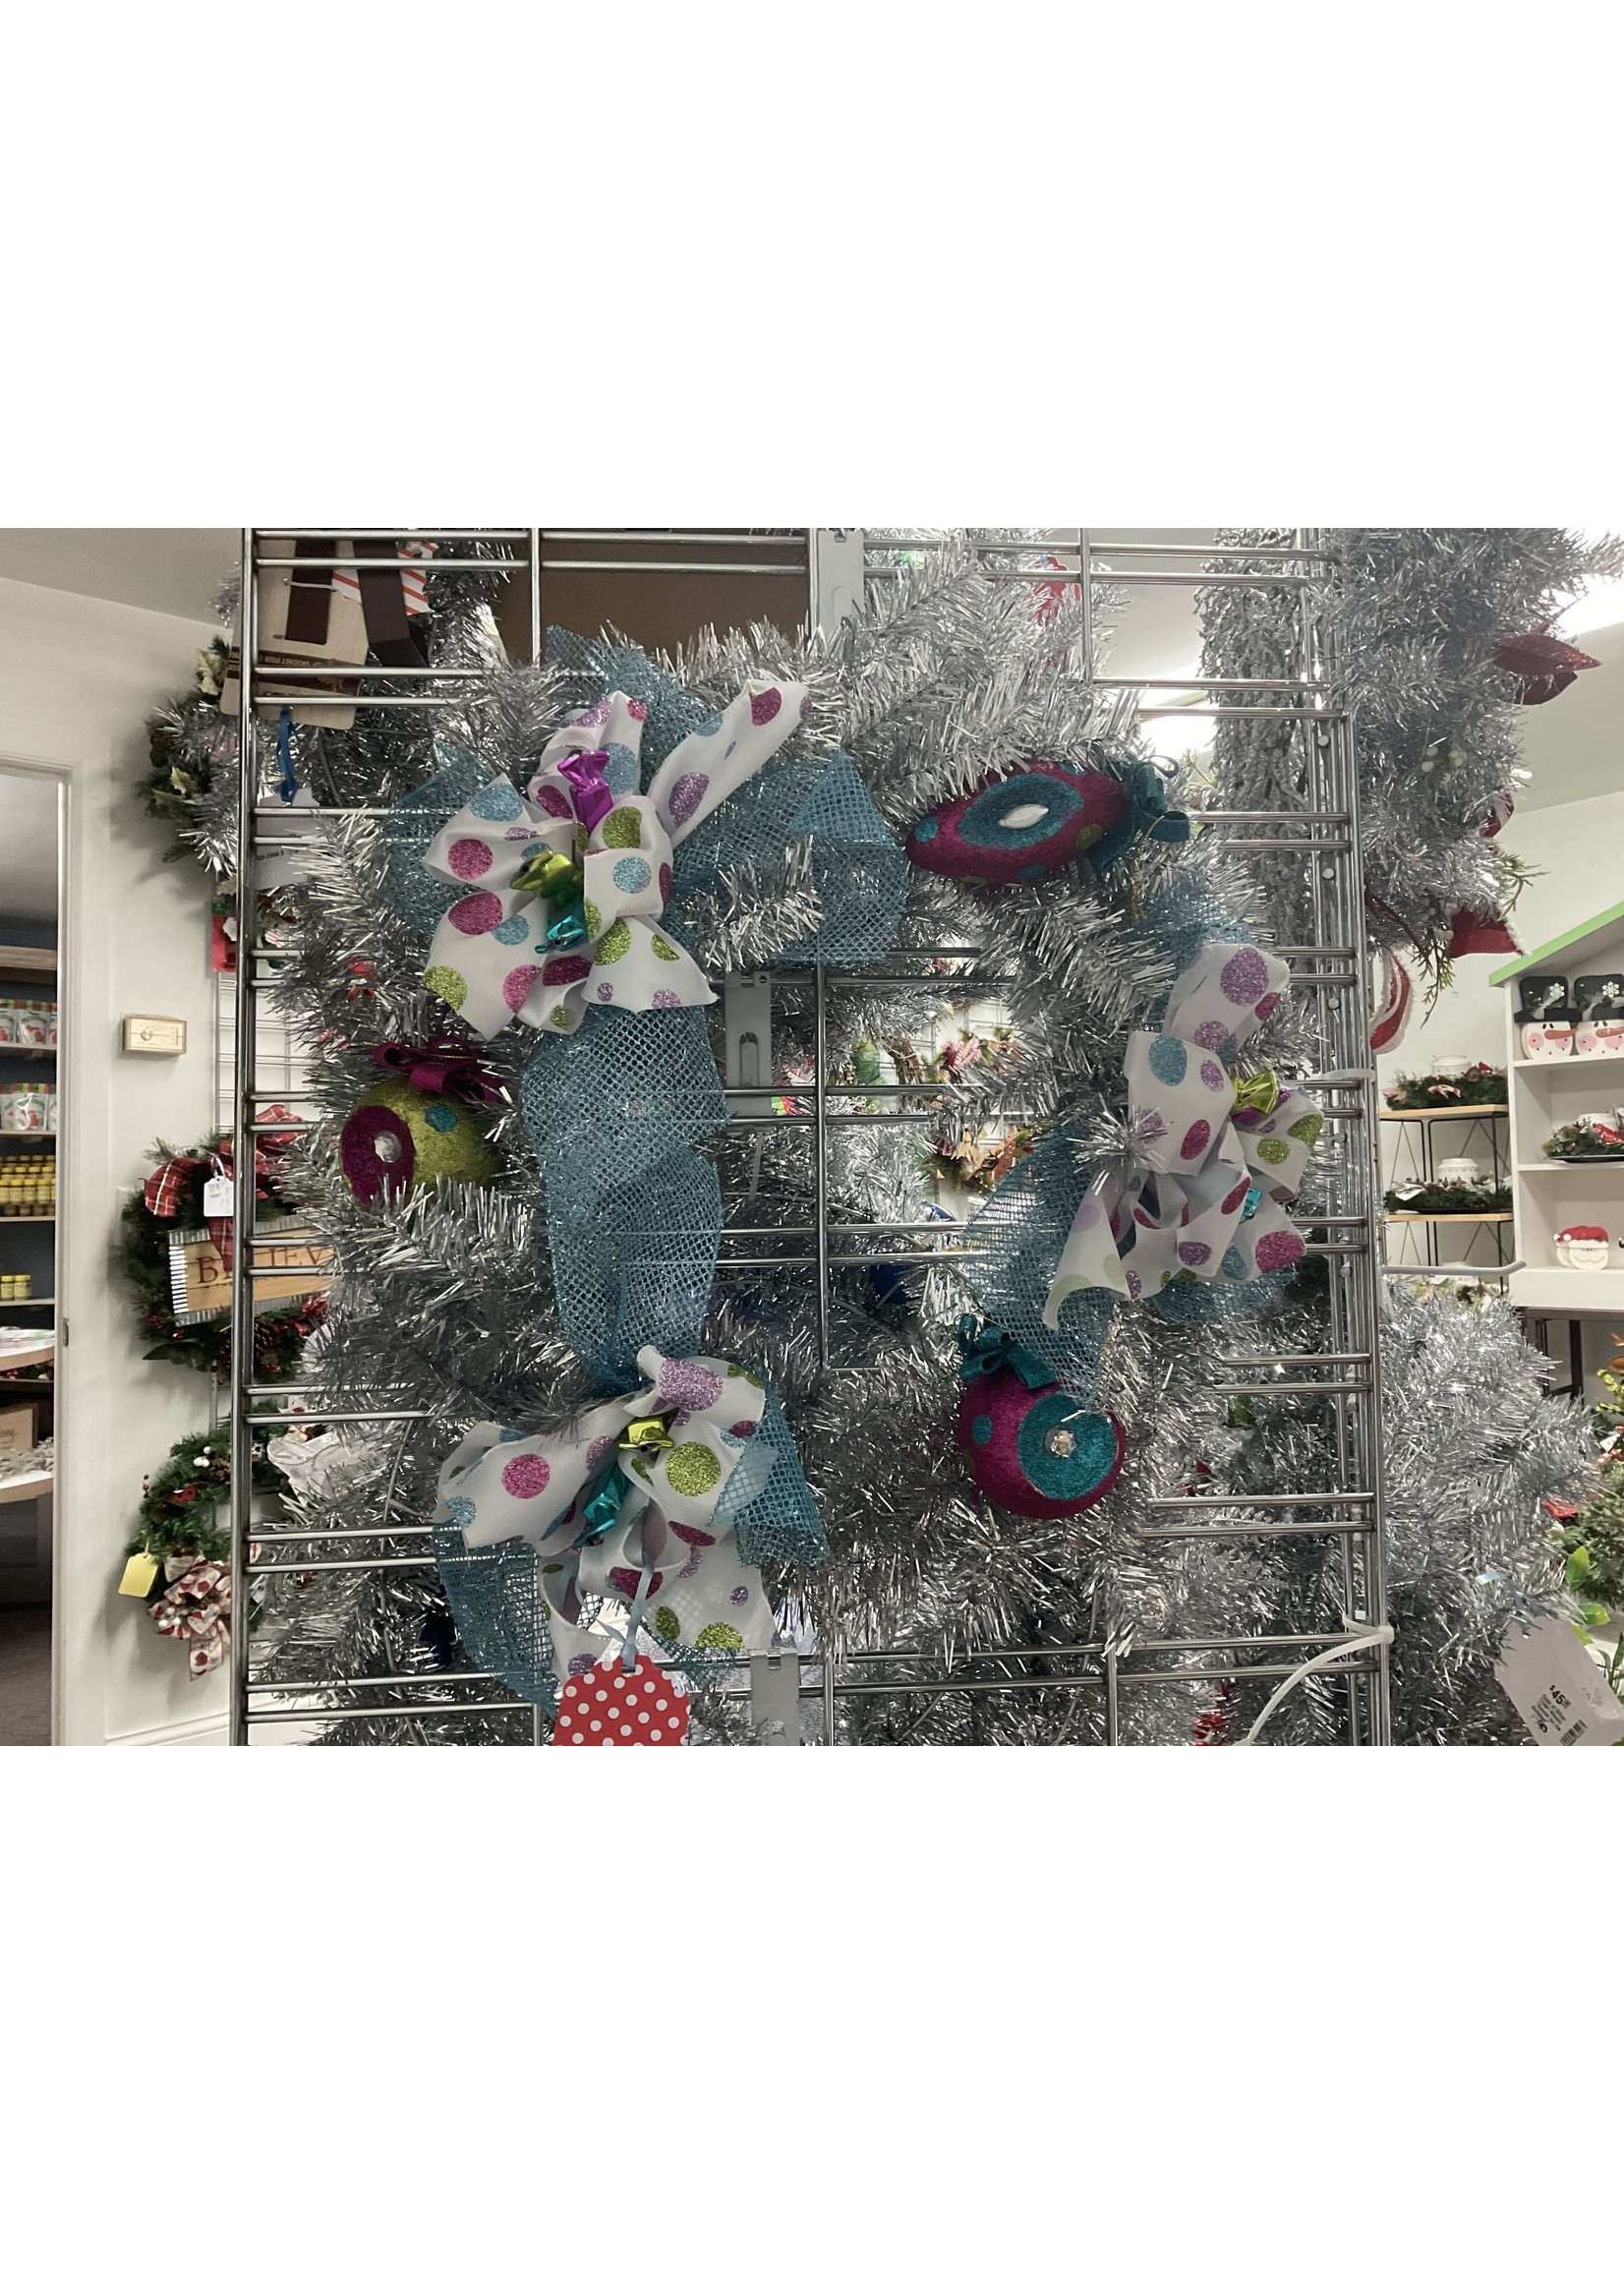 My New Favorite Thing Wreath Silver Tinsel with Ornaments and Multi Color Polka Dot Ribbon 20 inches